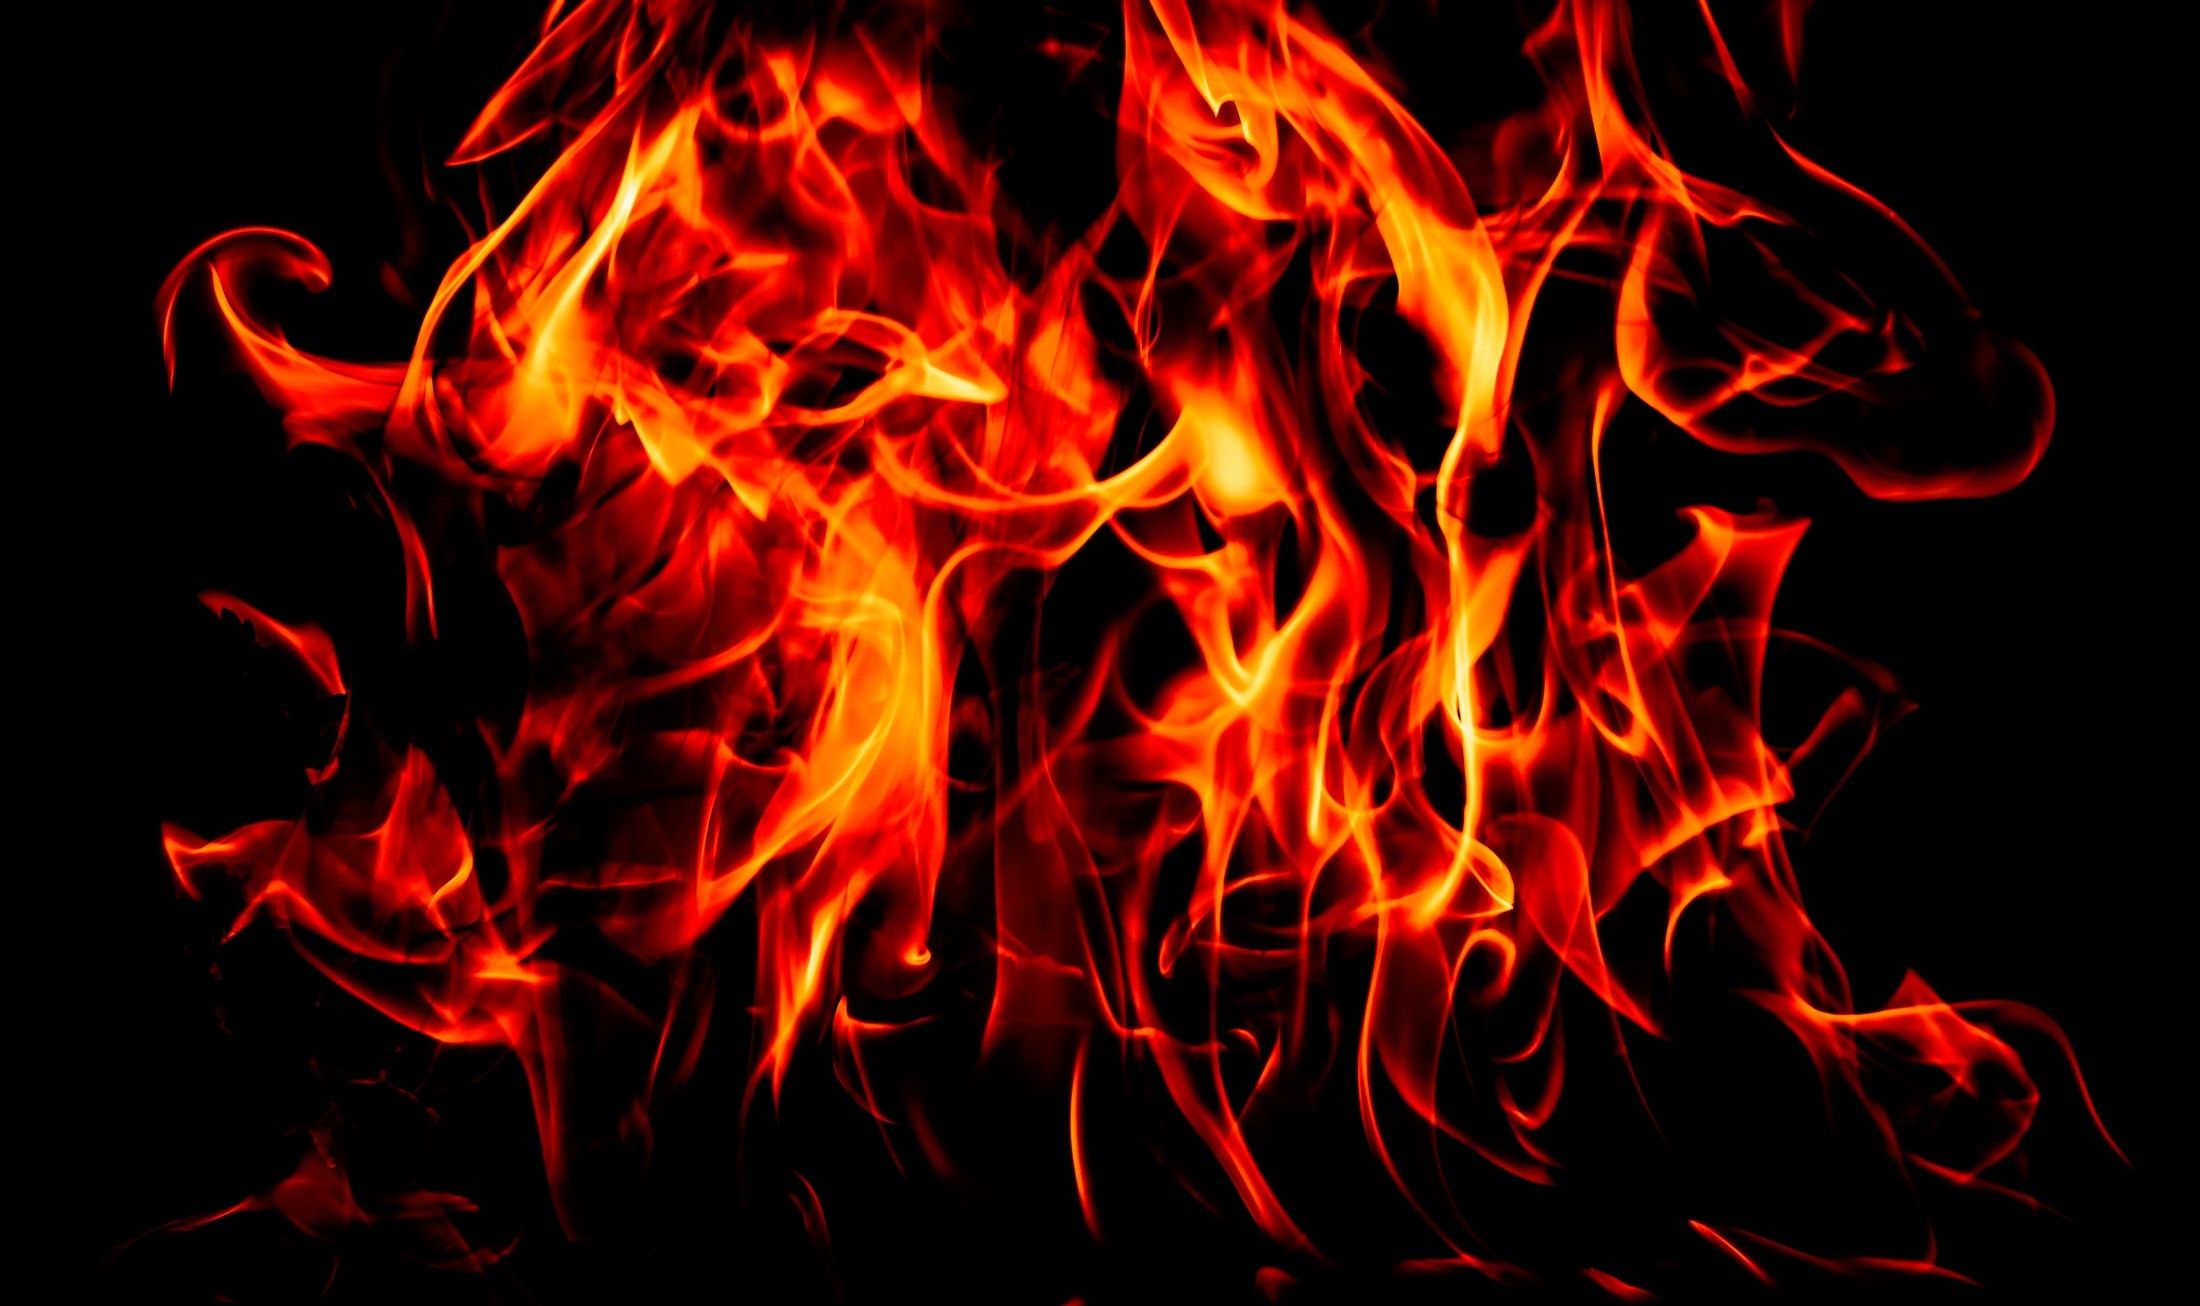 red and black flame illustration free image